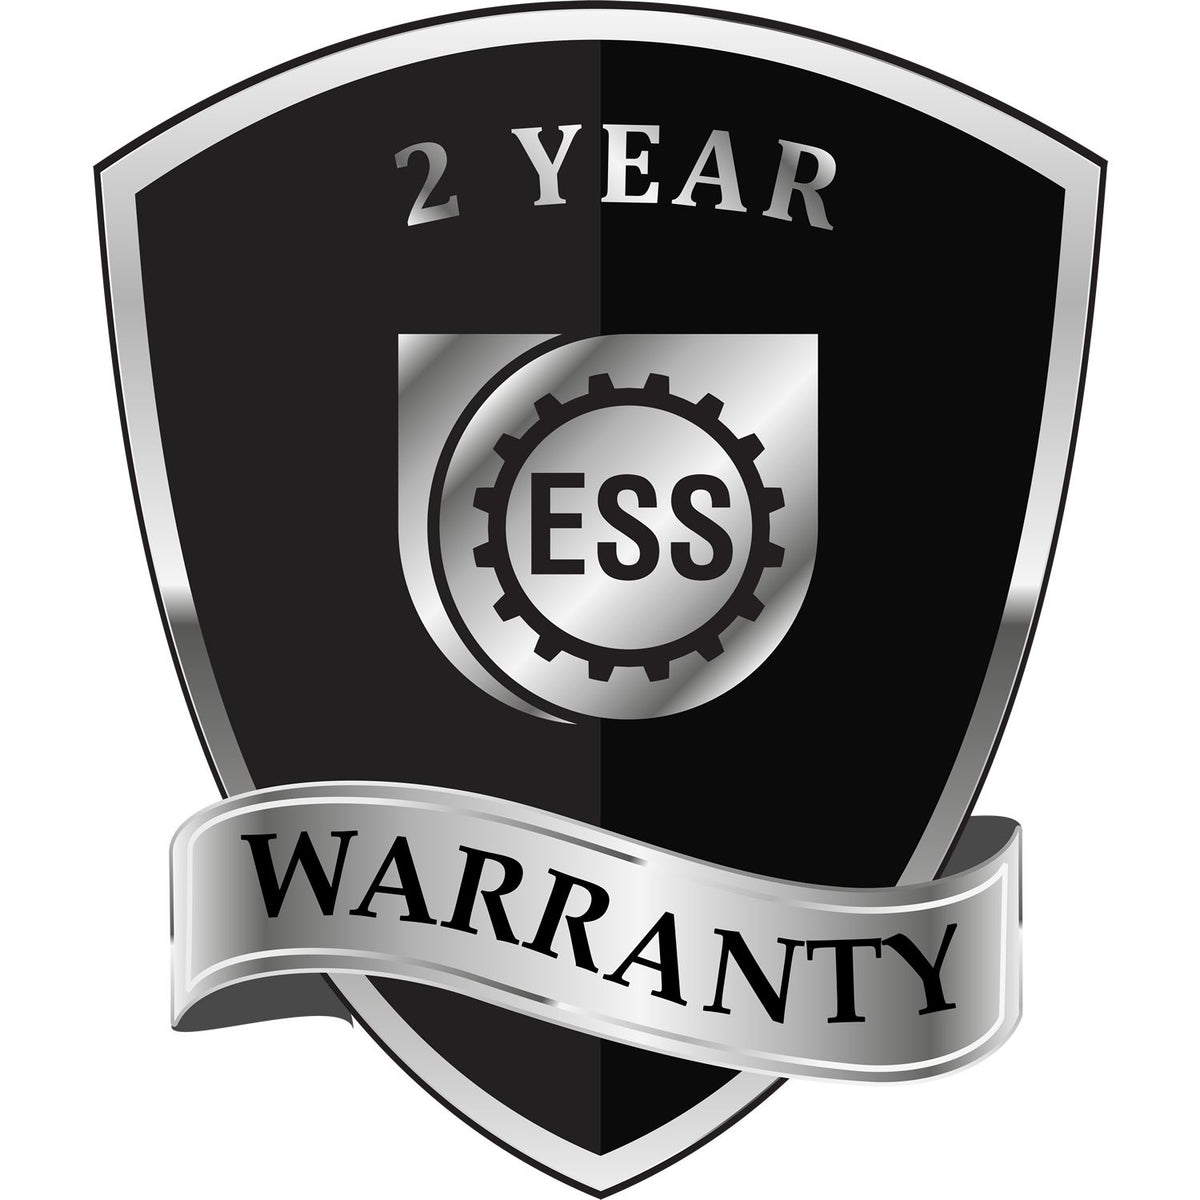 A badge or emblem showing a warranty icon for the Long Reach Massachusetts Land Surveyor Seal